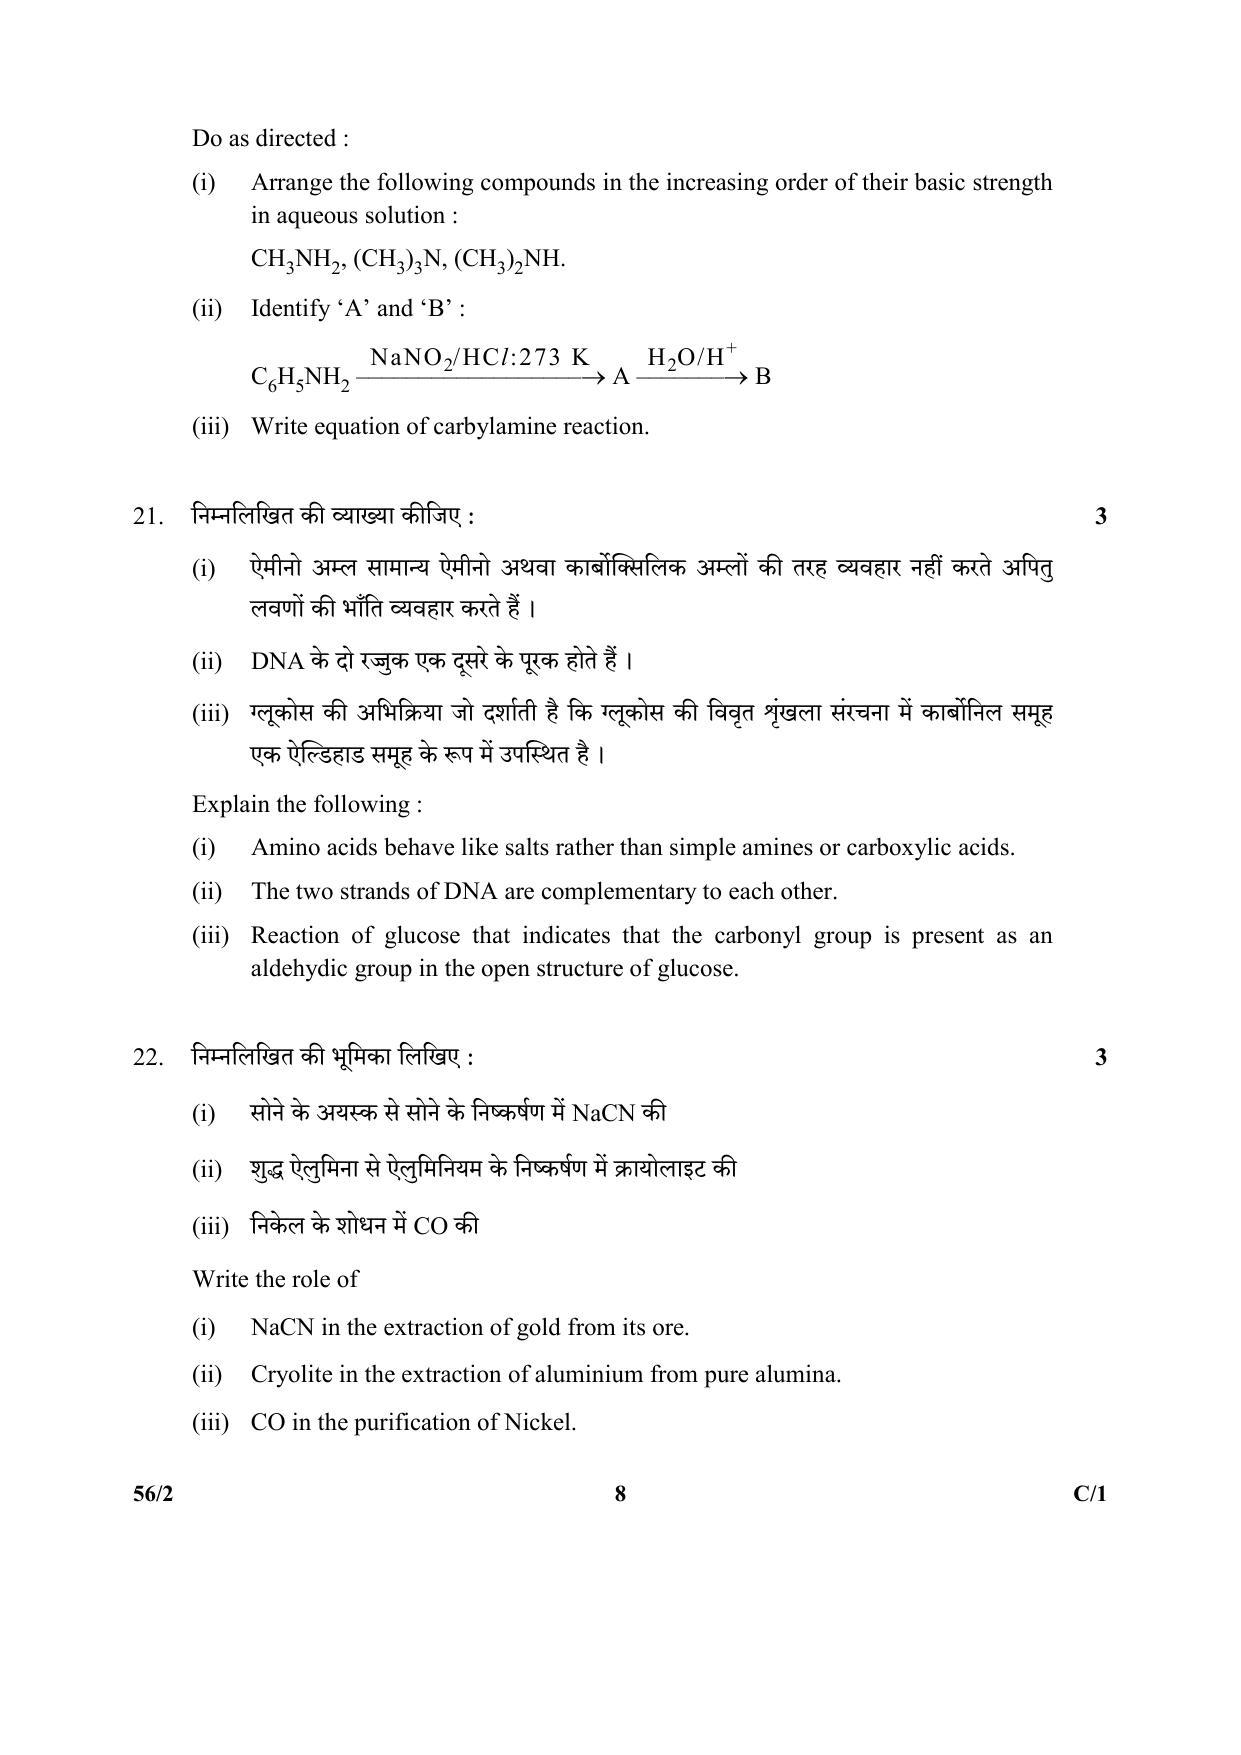 CBSE Class 12 56-2 (Chemistry) 2018 Compartment Question Paper - Page 8